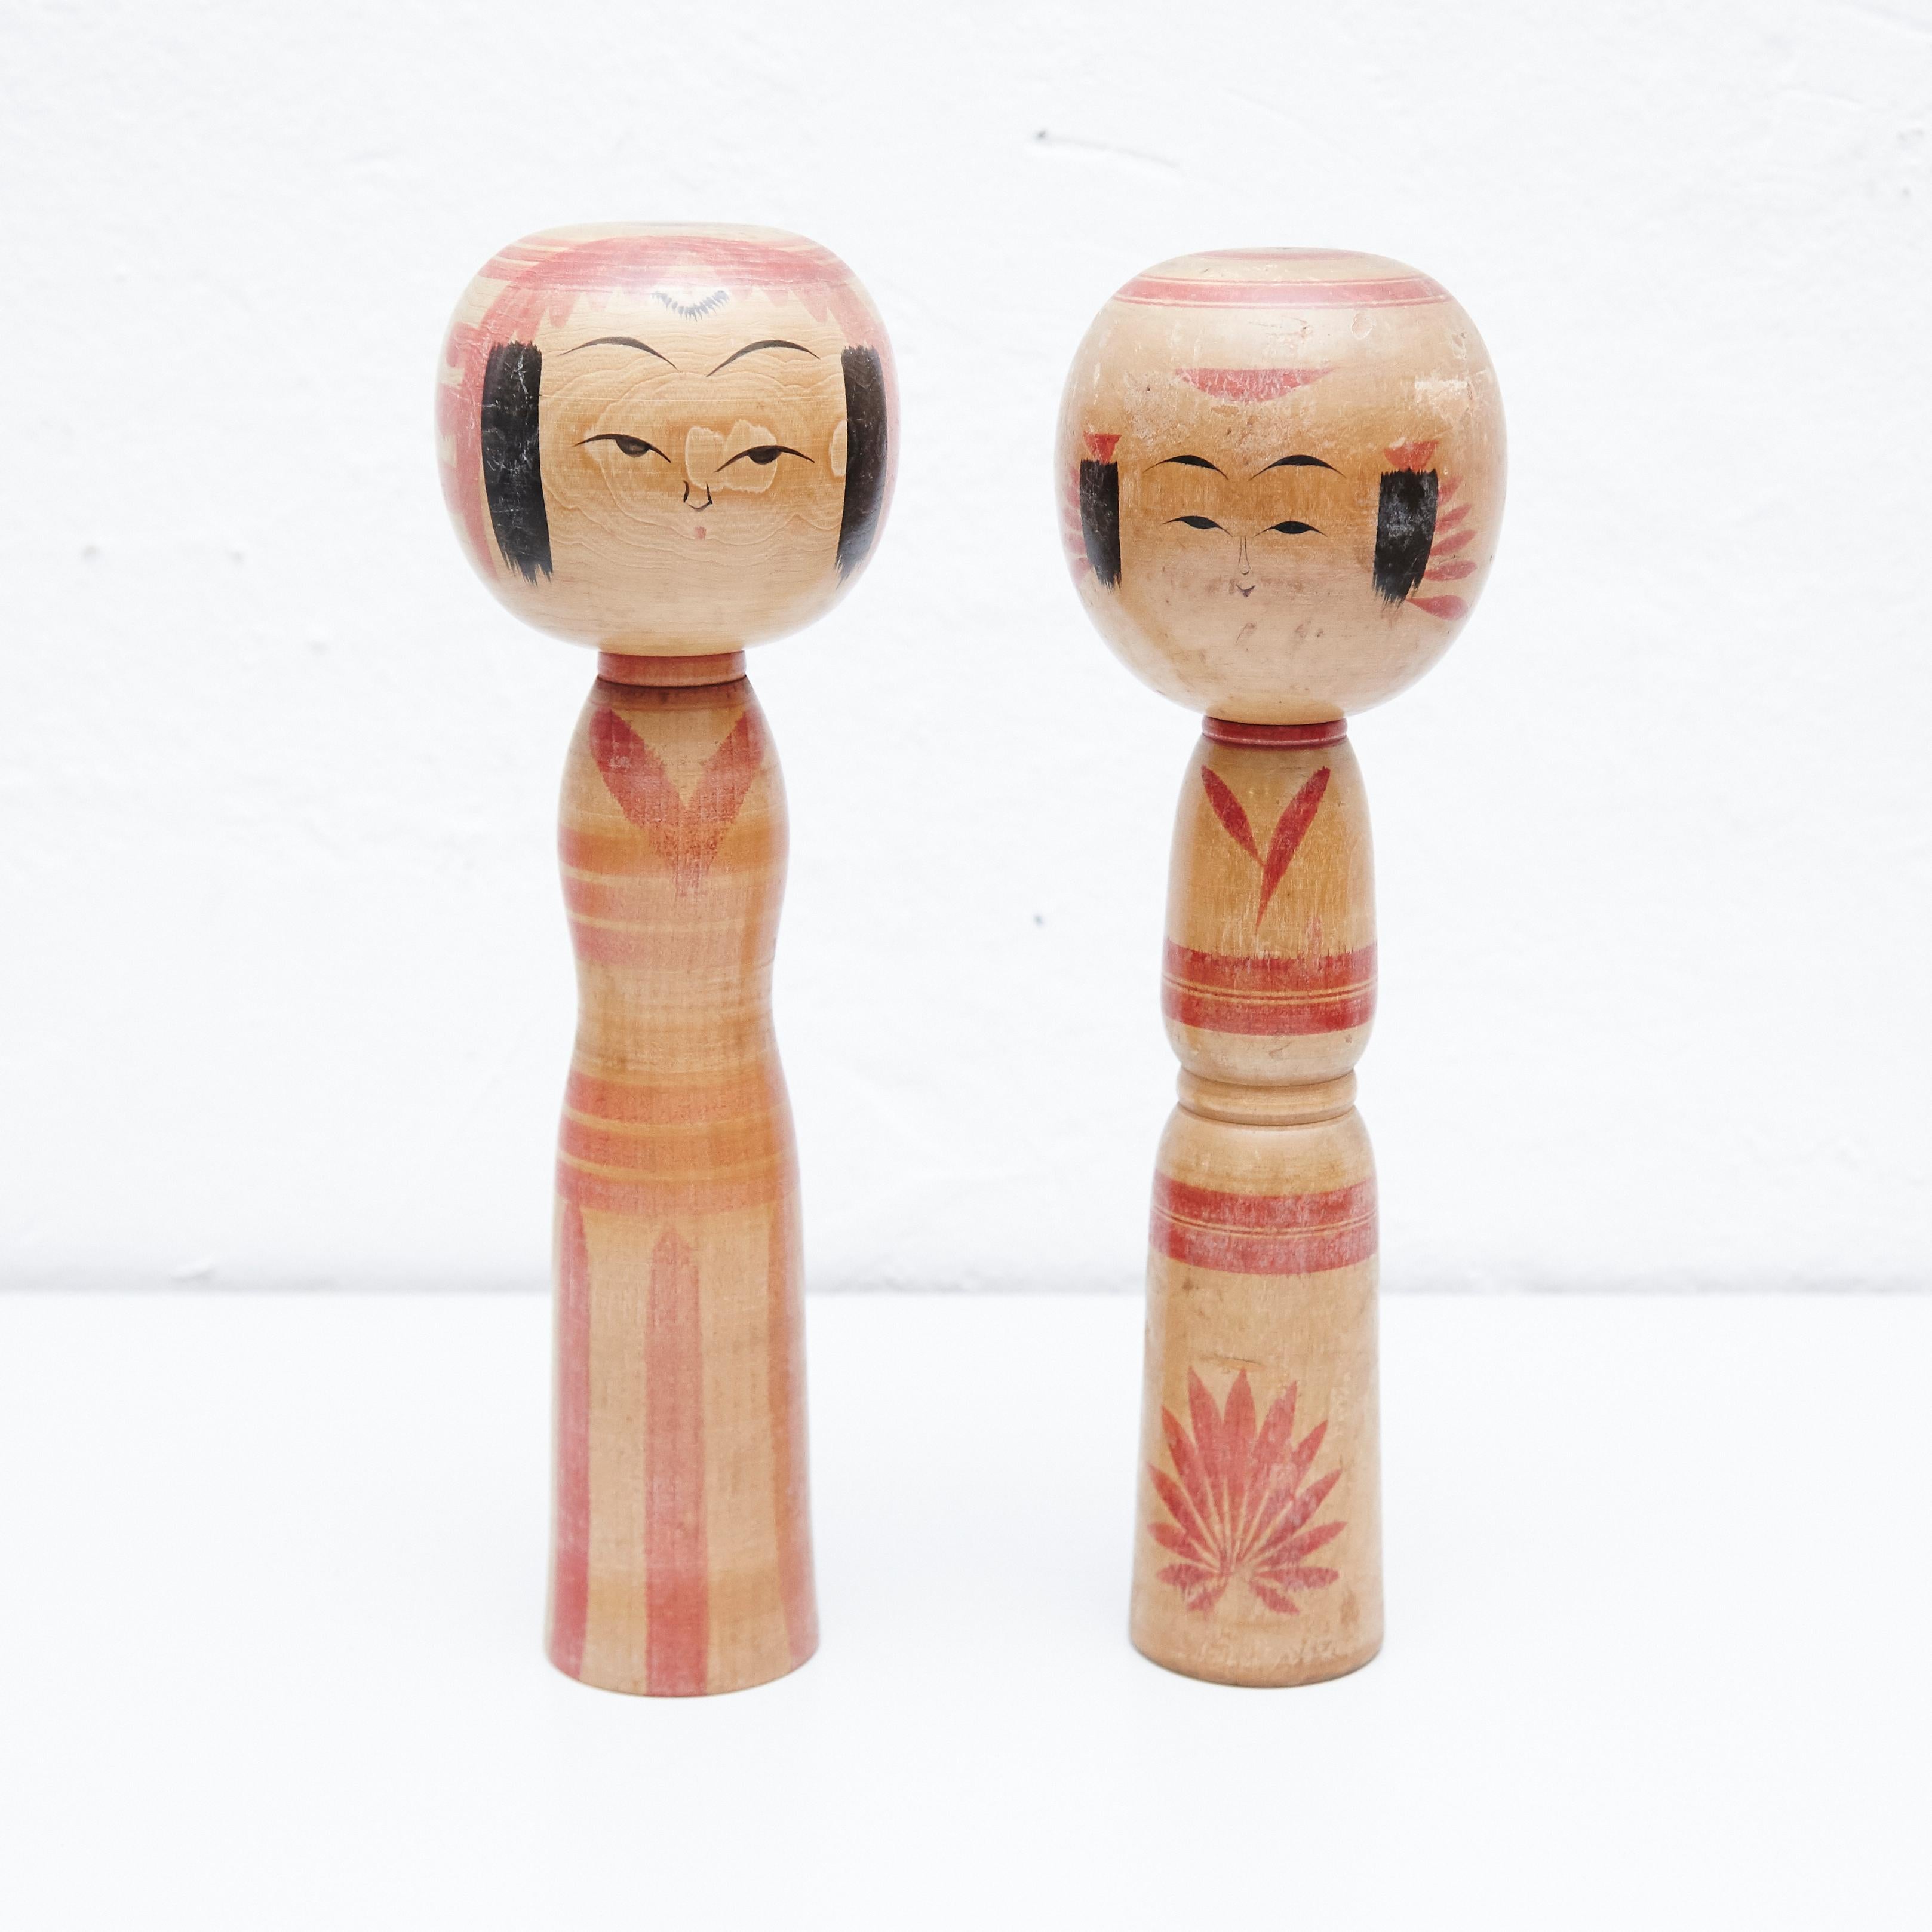 Japanese dolls called Kokeshi of the early 20th century.
Provenance from the northern Japan.
Set of 2.

Measures: 

31 x 9.5 cm
30 x 10cm


Handmade by Japanese artisants from wood. Have a simple trunk as a body and an enlarged head. One